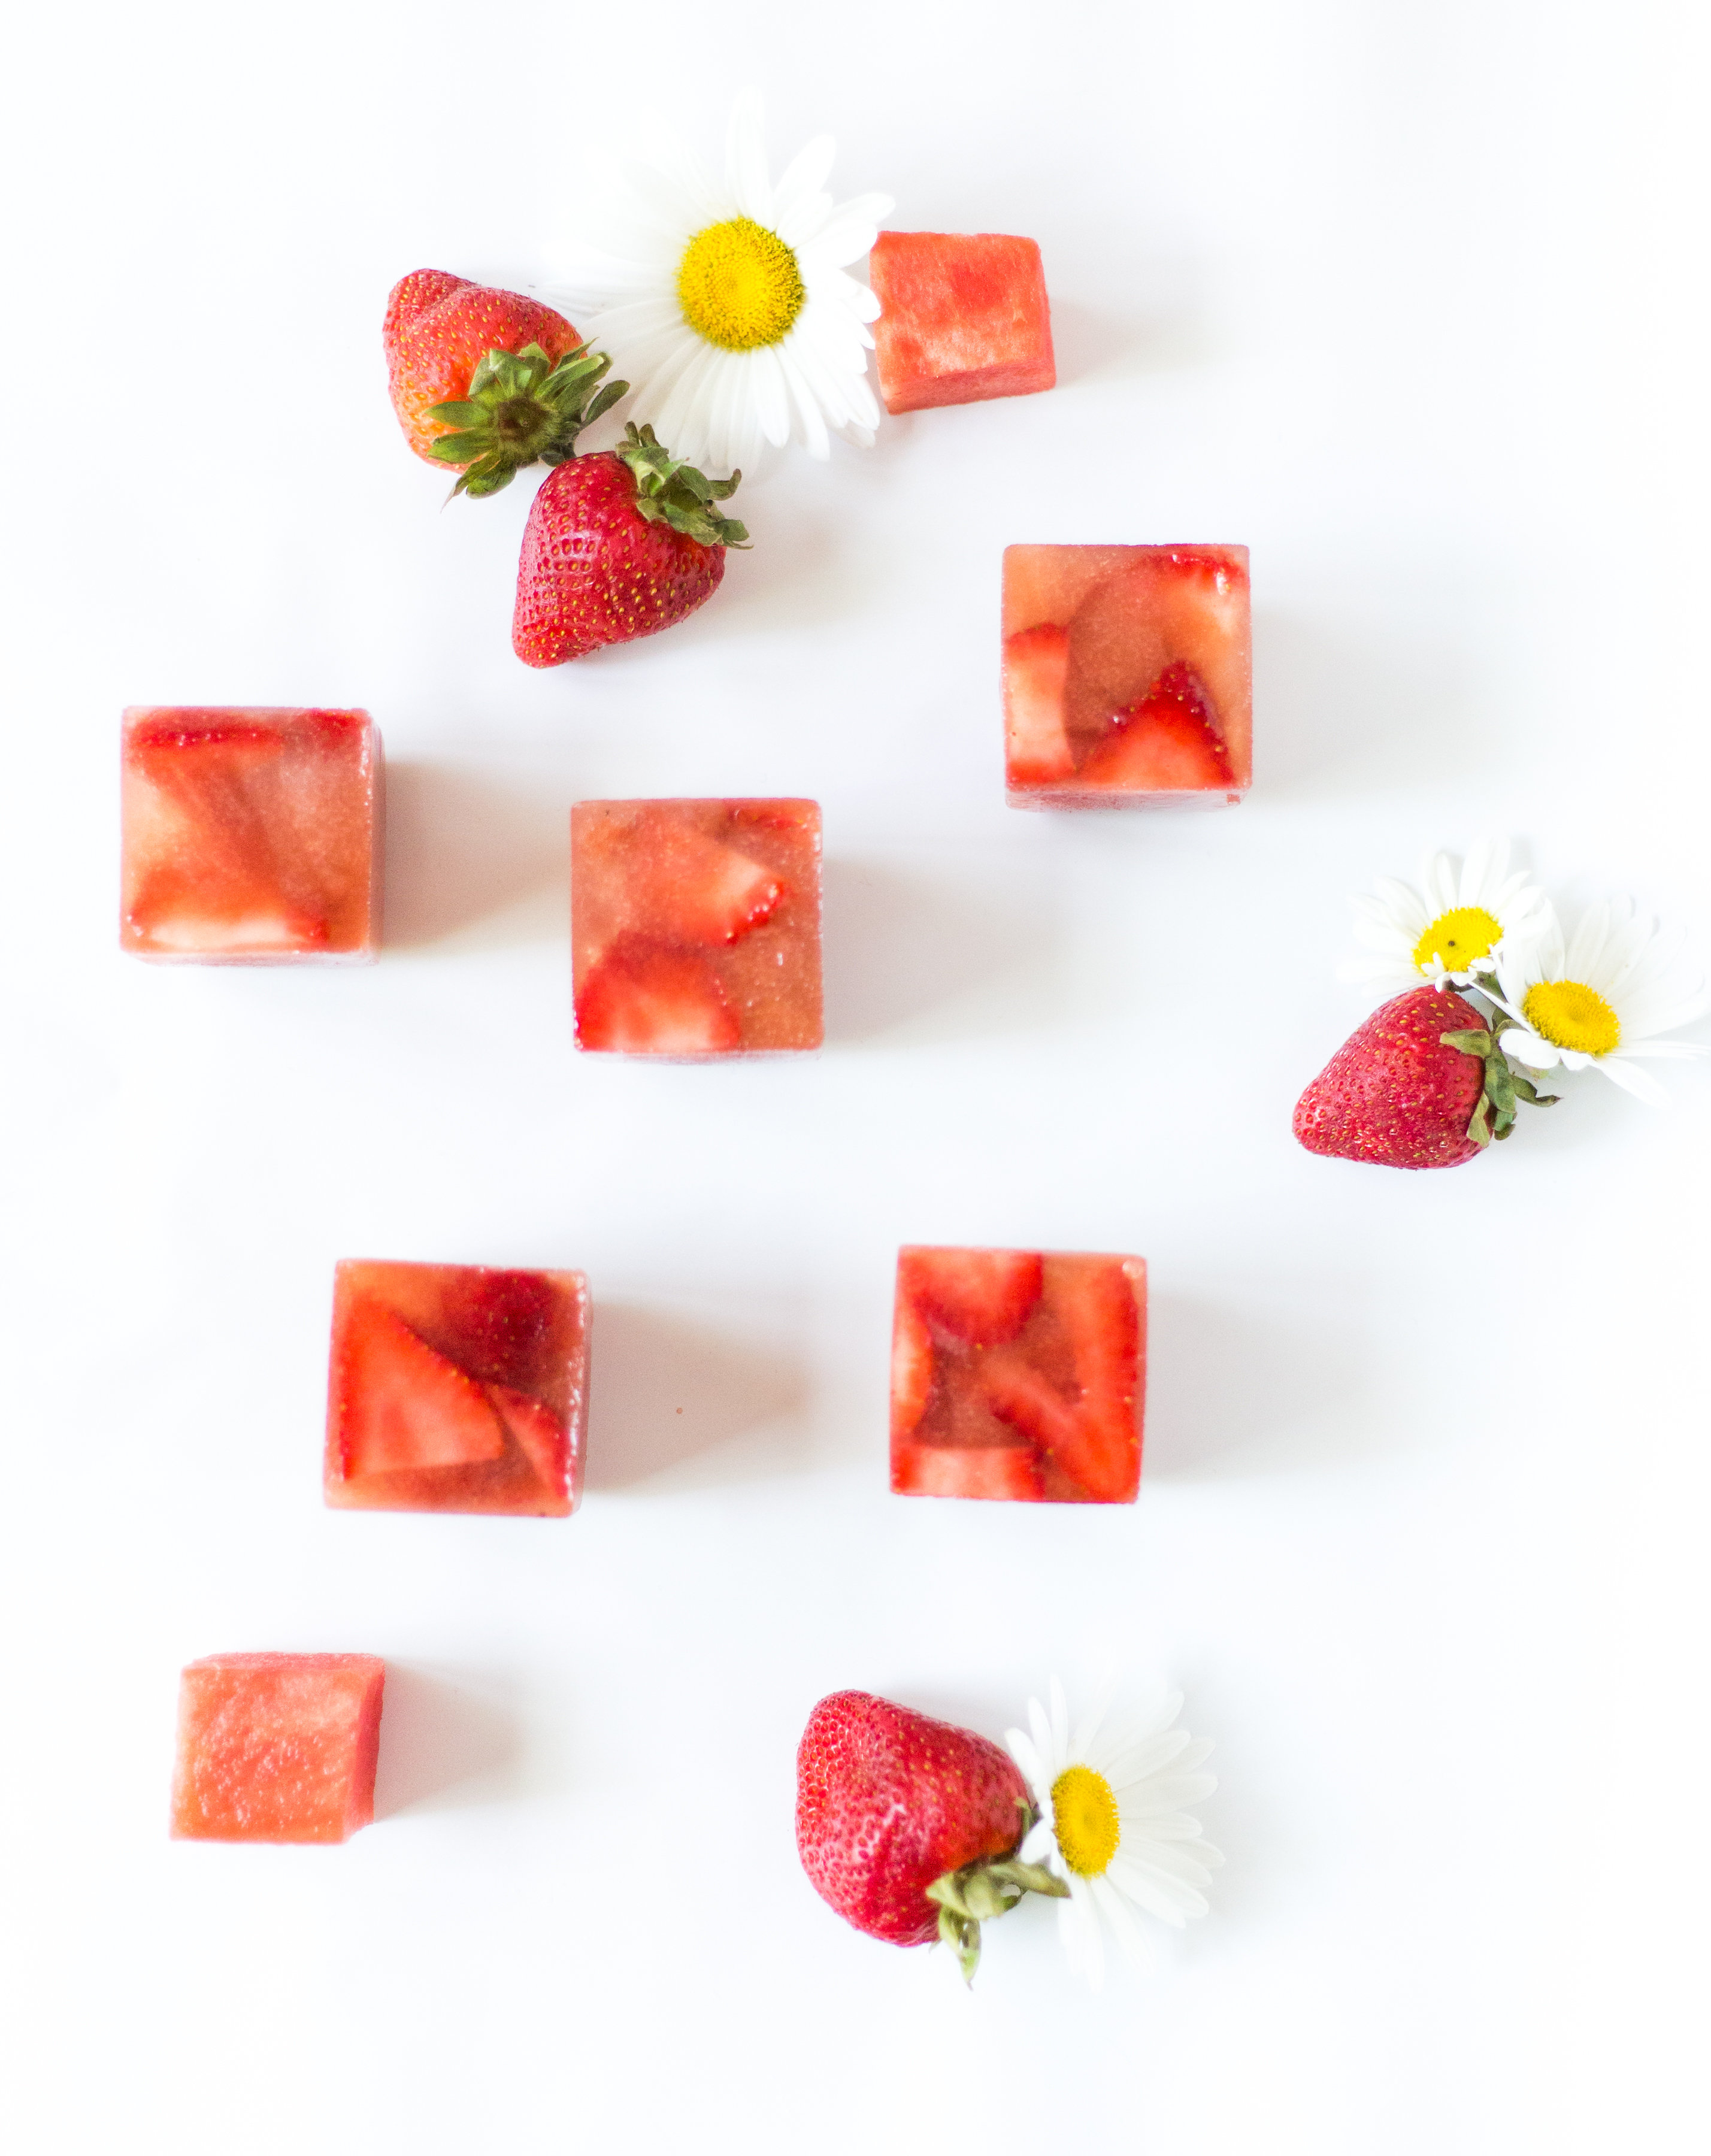 Say hello to your new favorite summer spritzer, made with prosecco and the yummiest giant strawberry watermelon ice cubes.